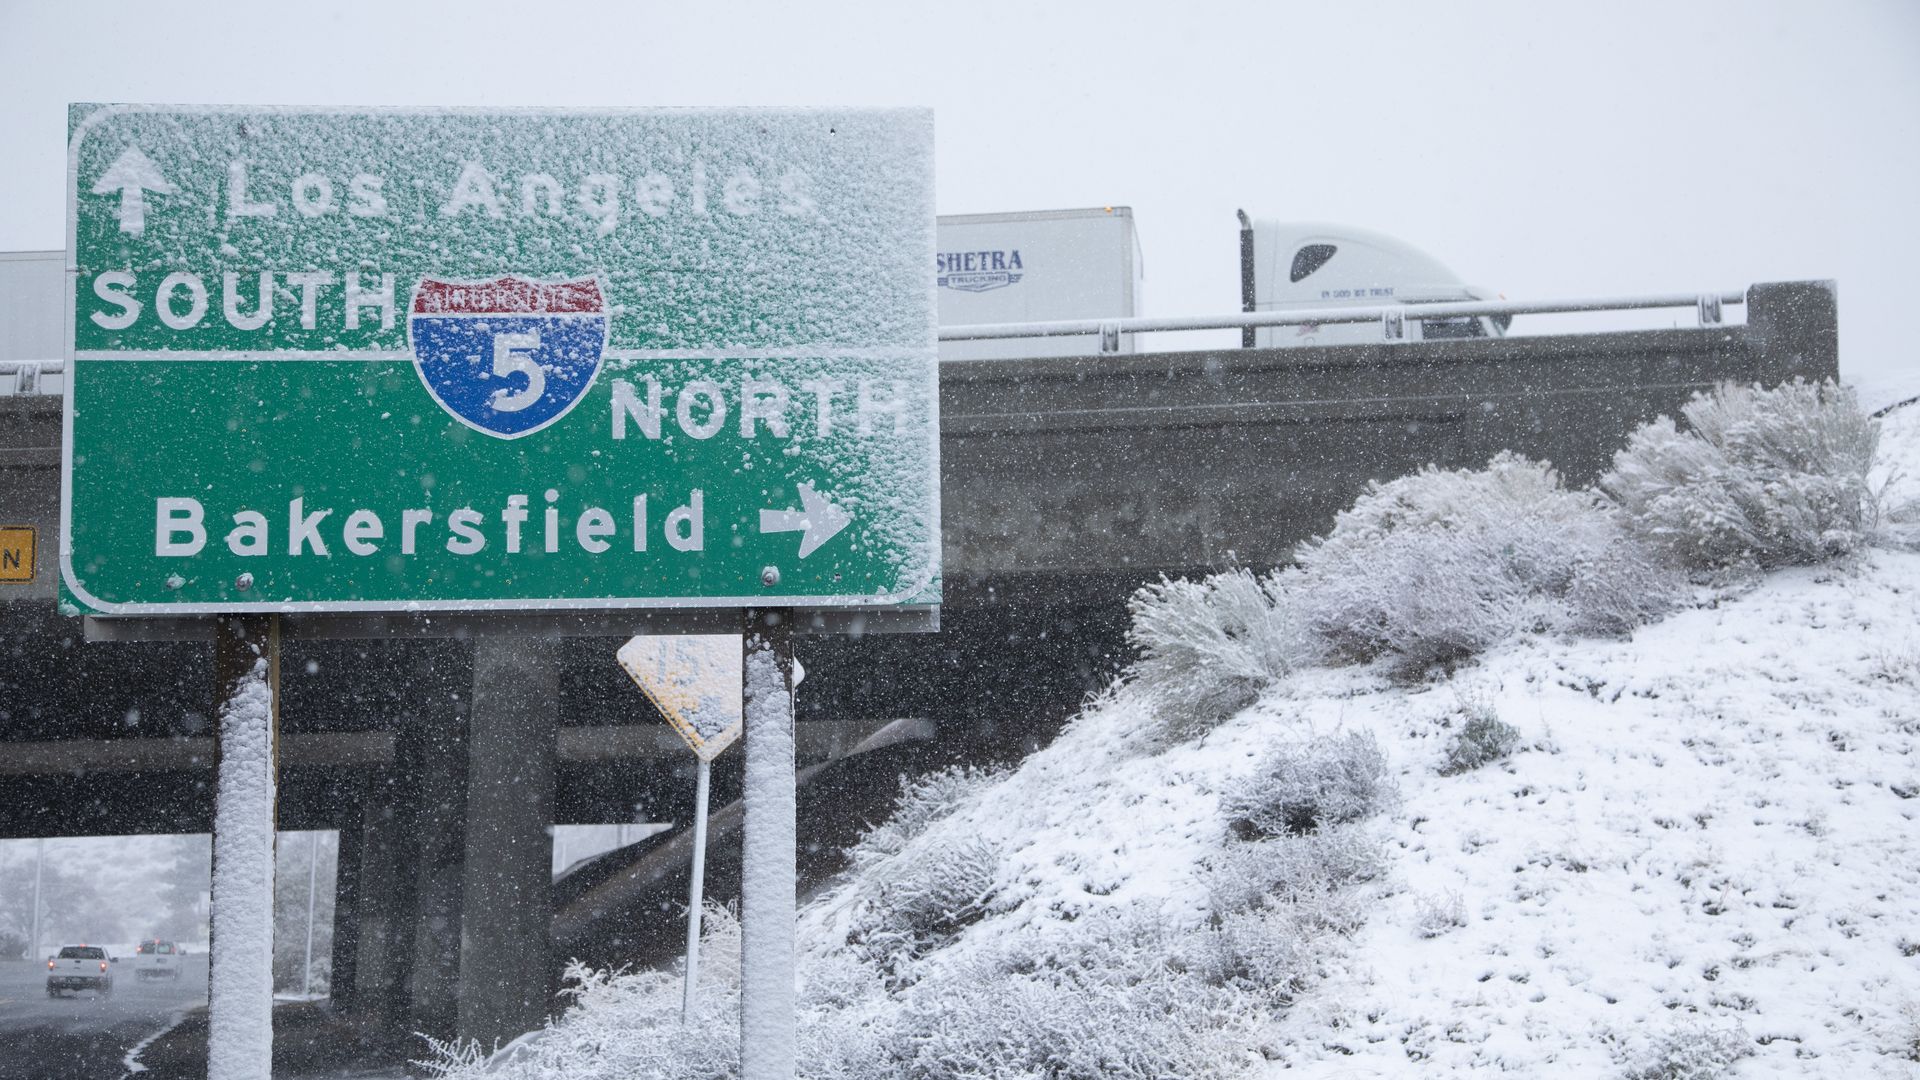  Snow covers Gorman on Tuesday, Dec. 14, 2021 as a cold storm passing through Southern California. 